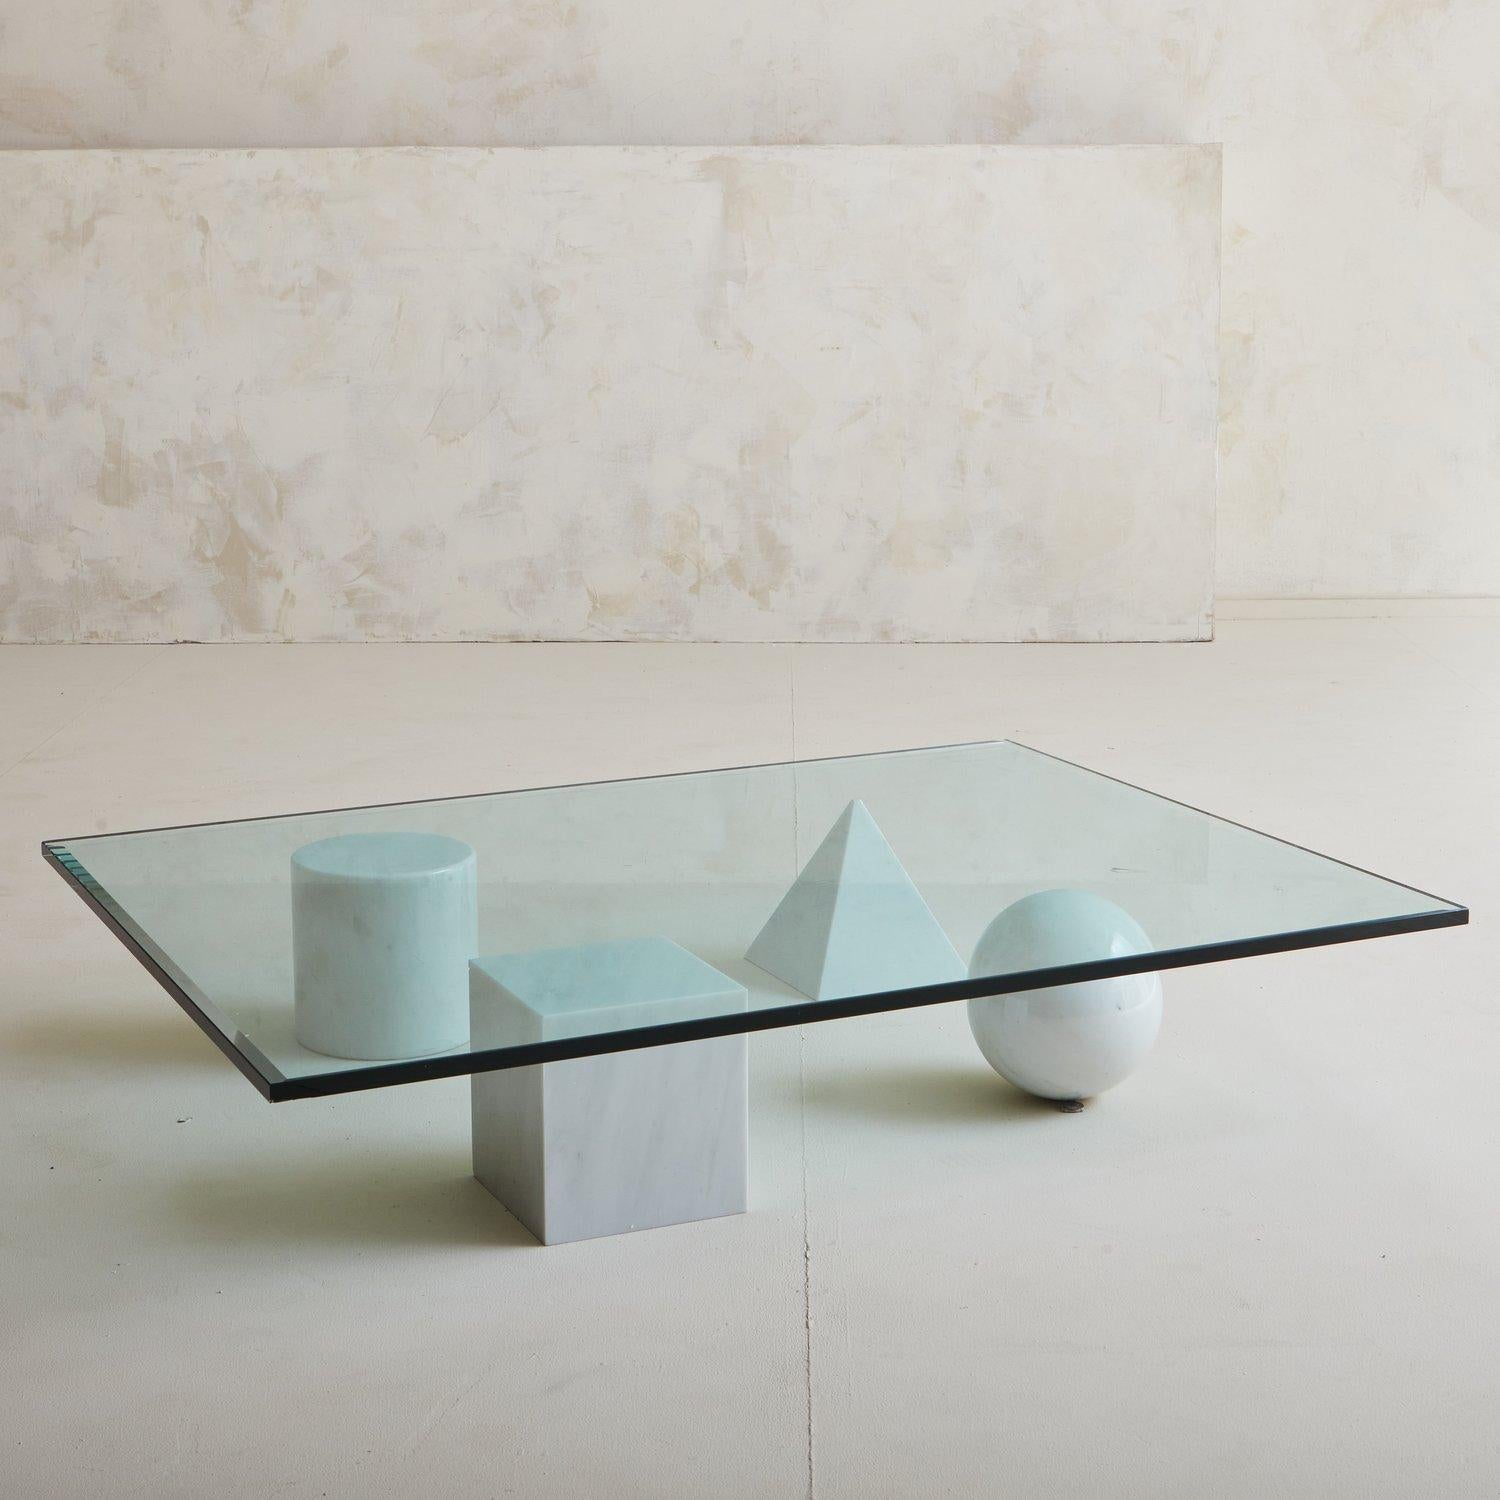 A Massimo Vignelli & Lella Vignell Metafora coffee table featuring four geometric shapes in Carrara marble and a rectangular .75” thick glass top. Italy, 1970s.

Massimo Vignelli (January 10, 1931 – May 27, 2014) was an Italian designer who worked